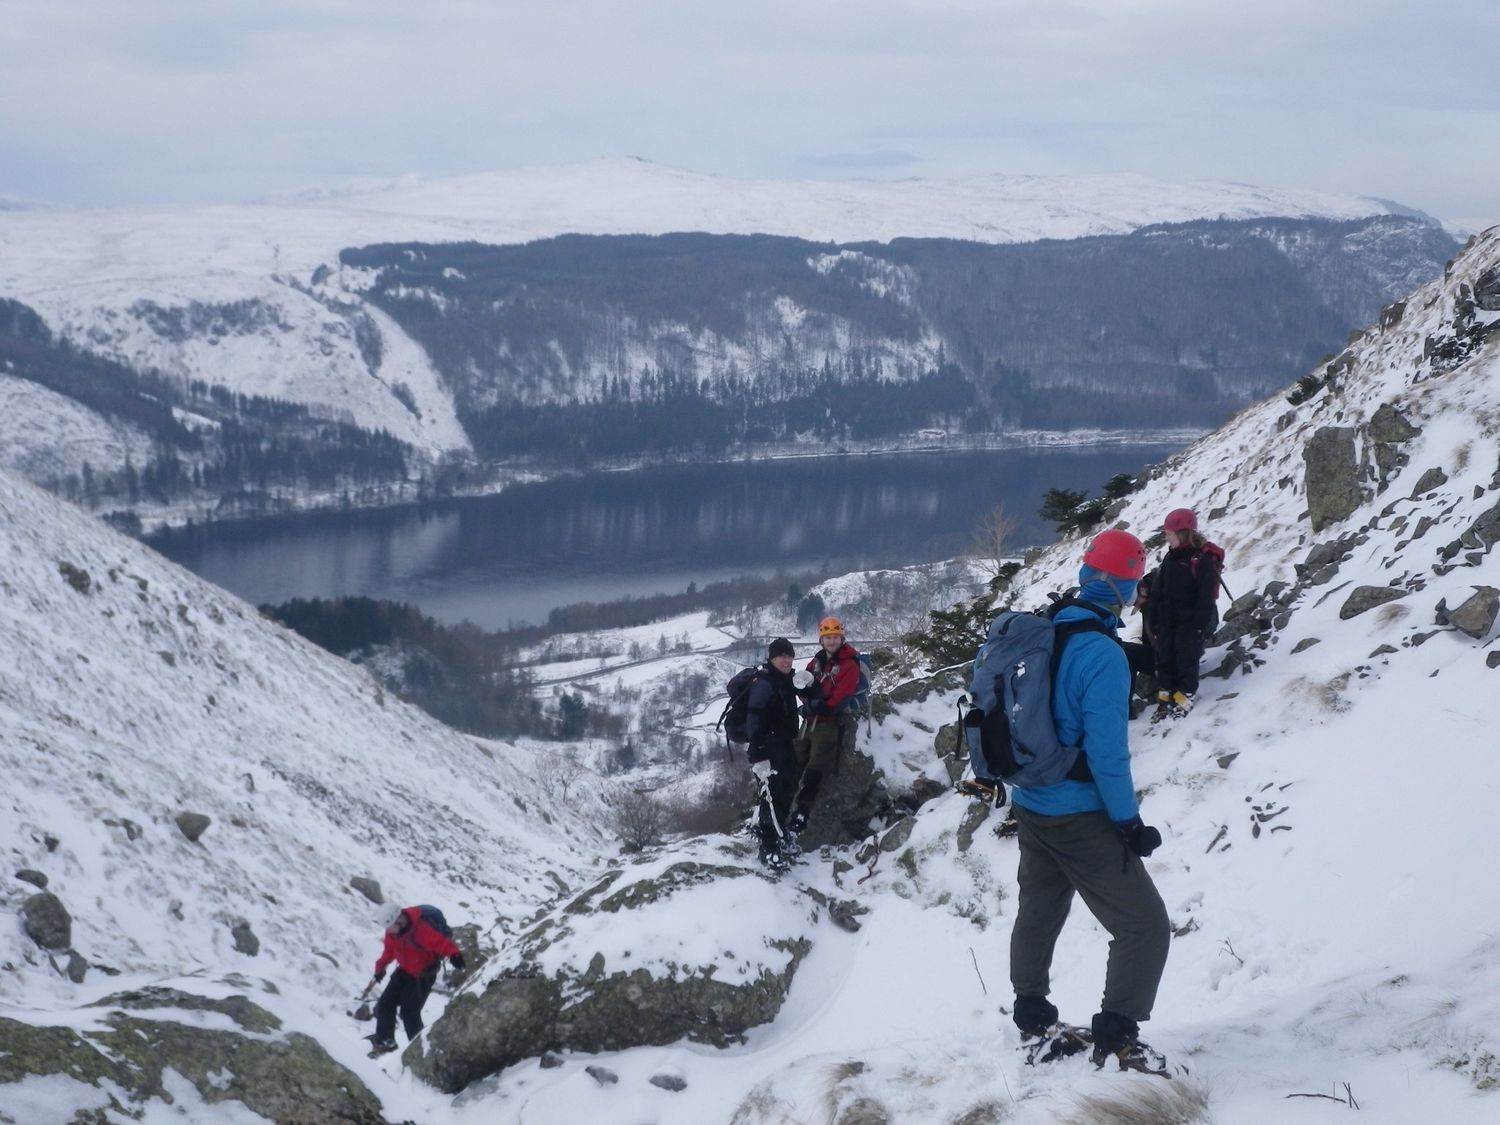  Scrambling in the Lake District mountains in winter - Chris Ensoll Mountain Guide 